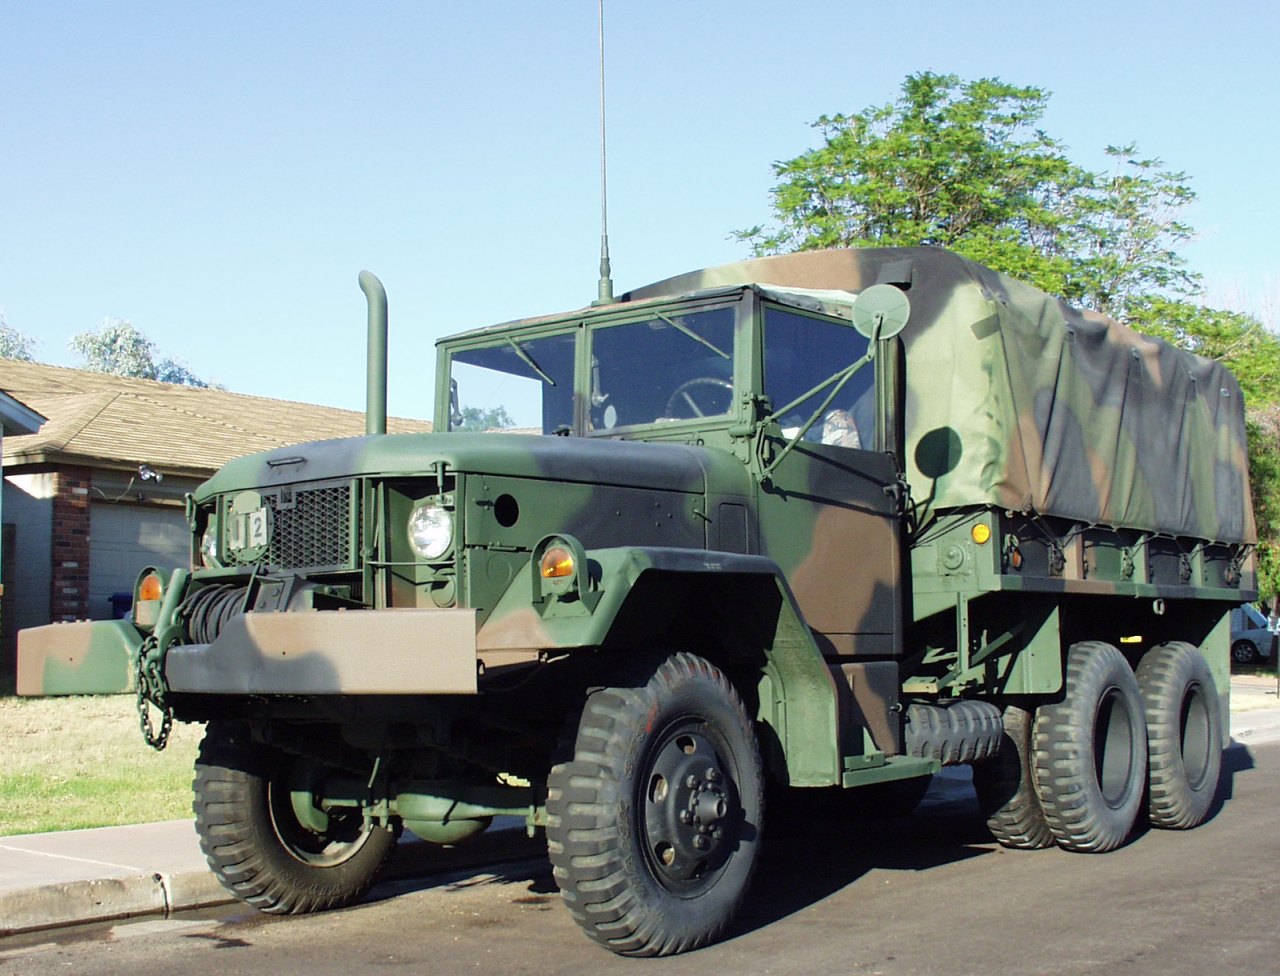 File:M35A2 with winch.jpg - Wikipedia, the free encyclopedia